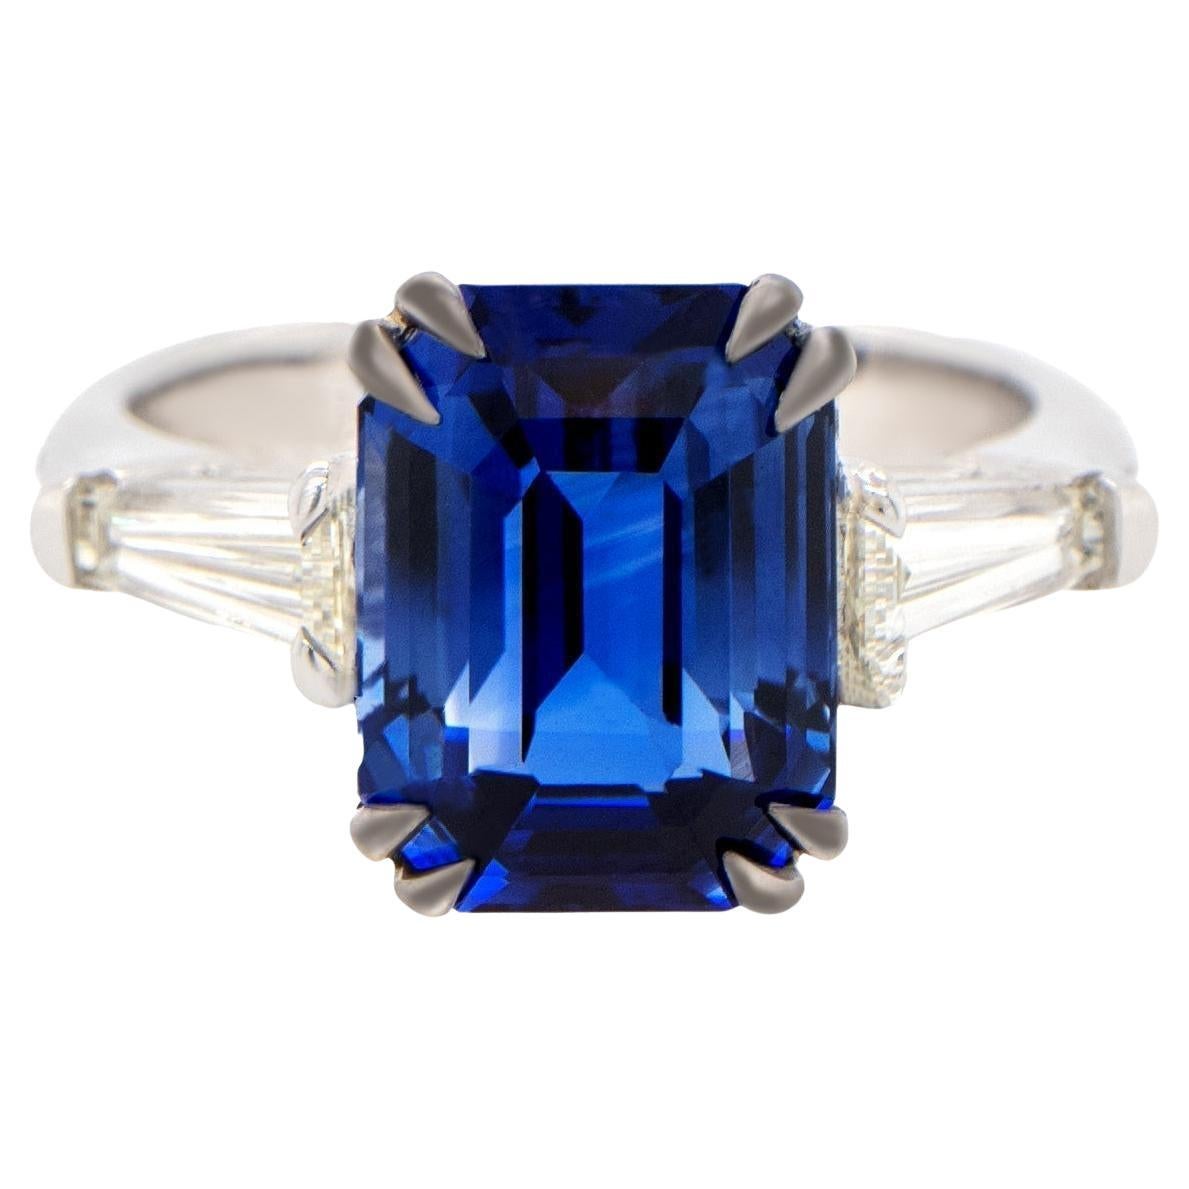 Important GIA Certified Natural Ceylon Sapphire Ring Diamonds 6.27 Carats 18K